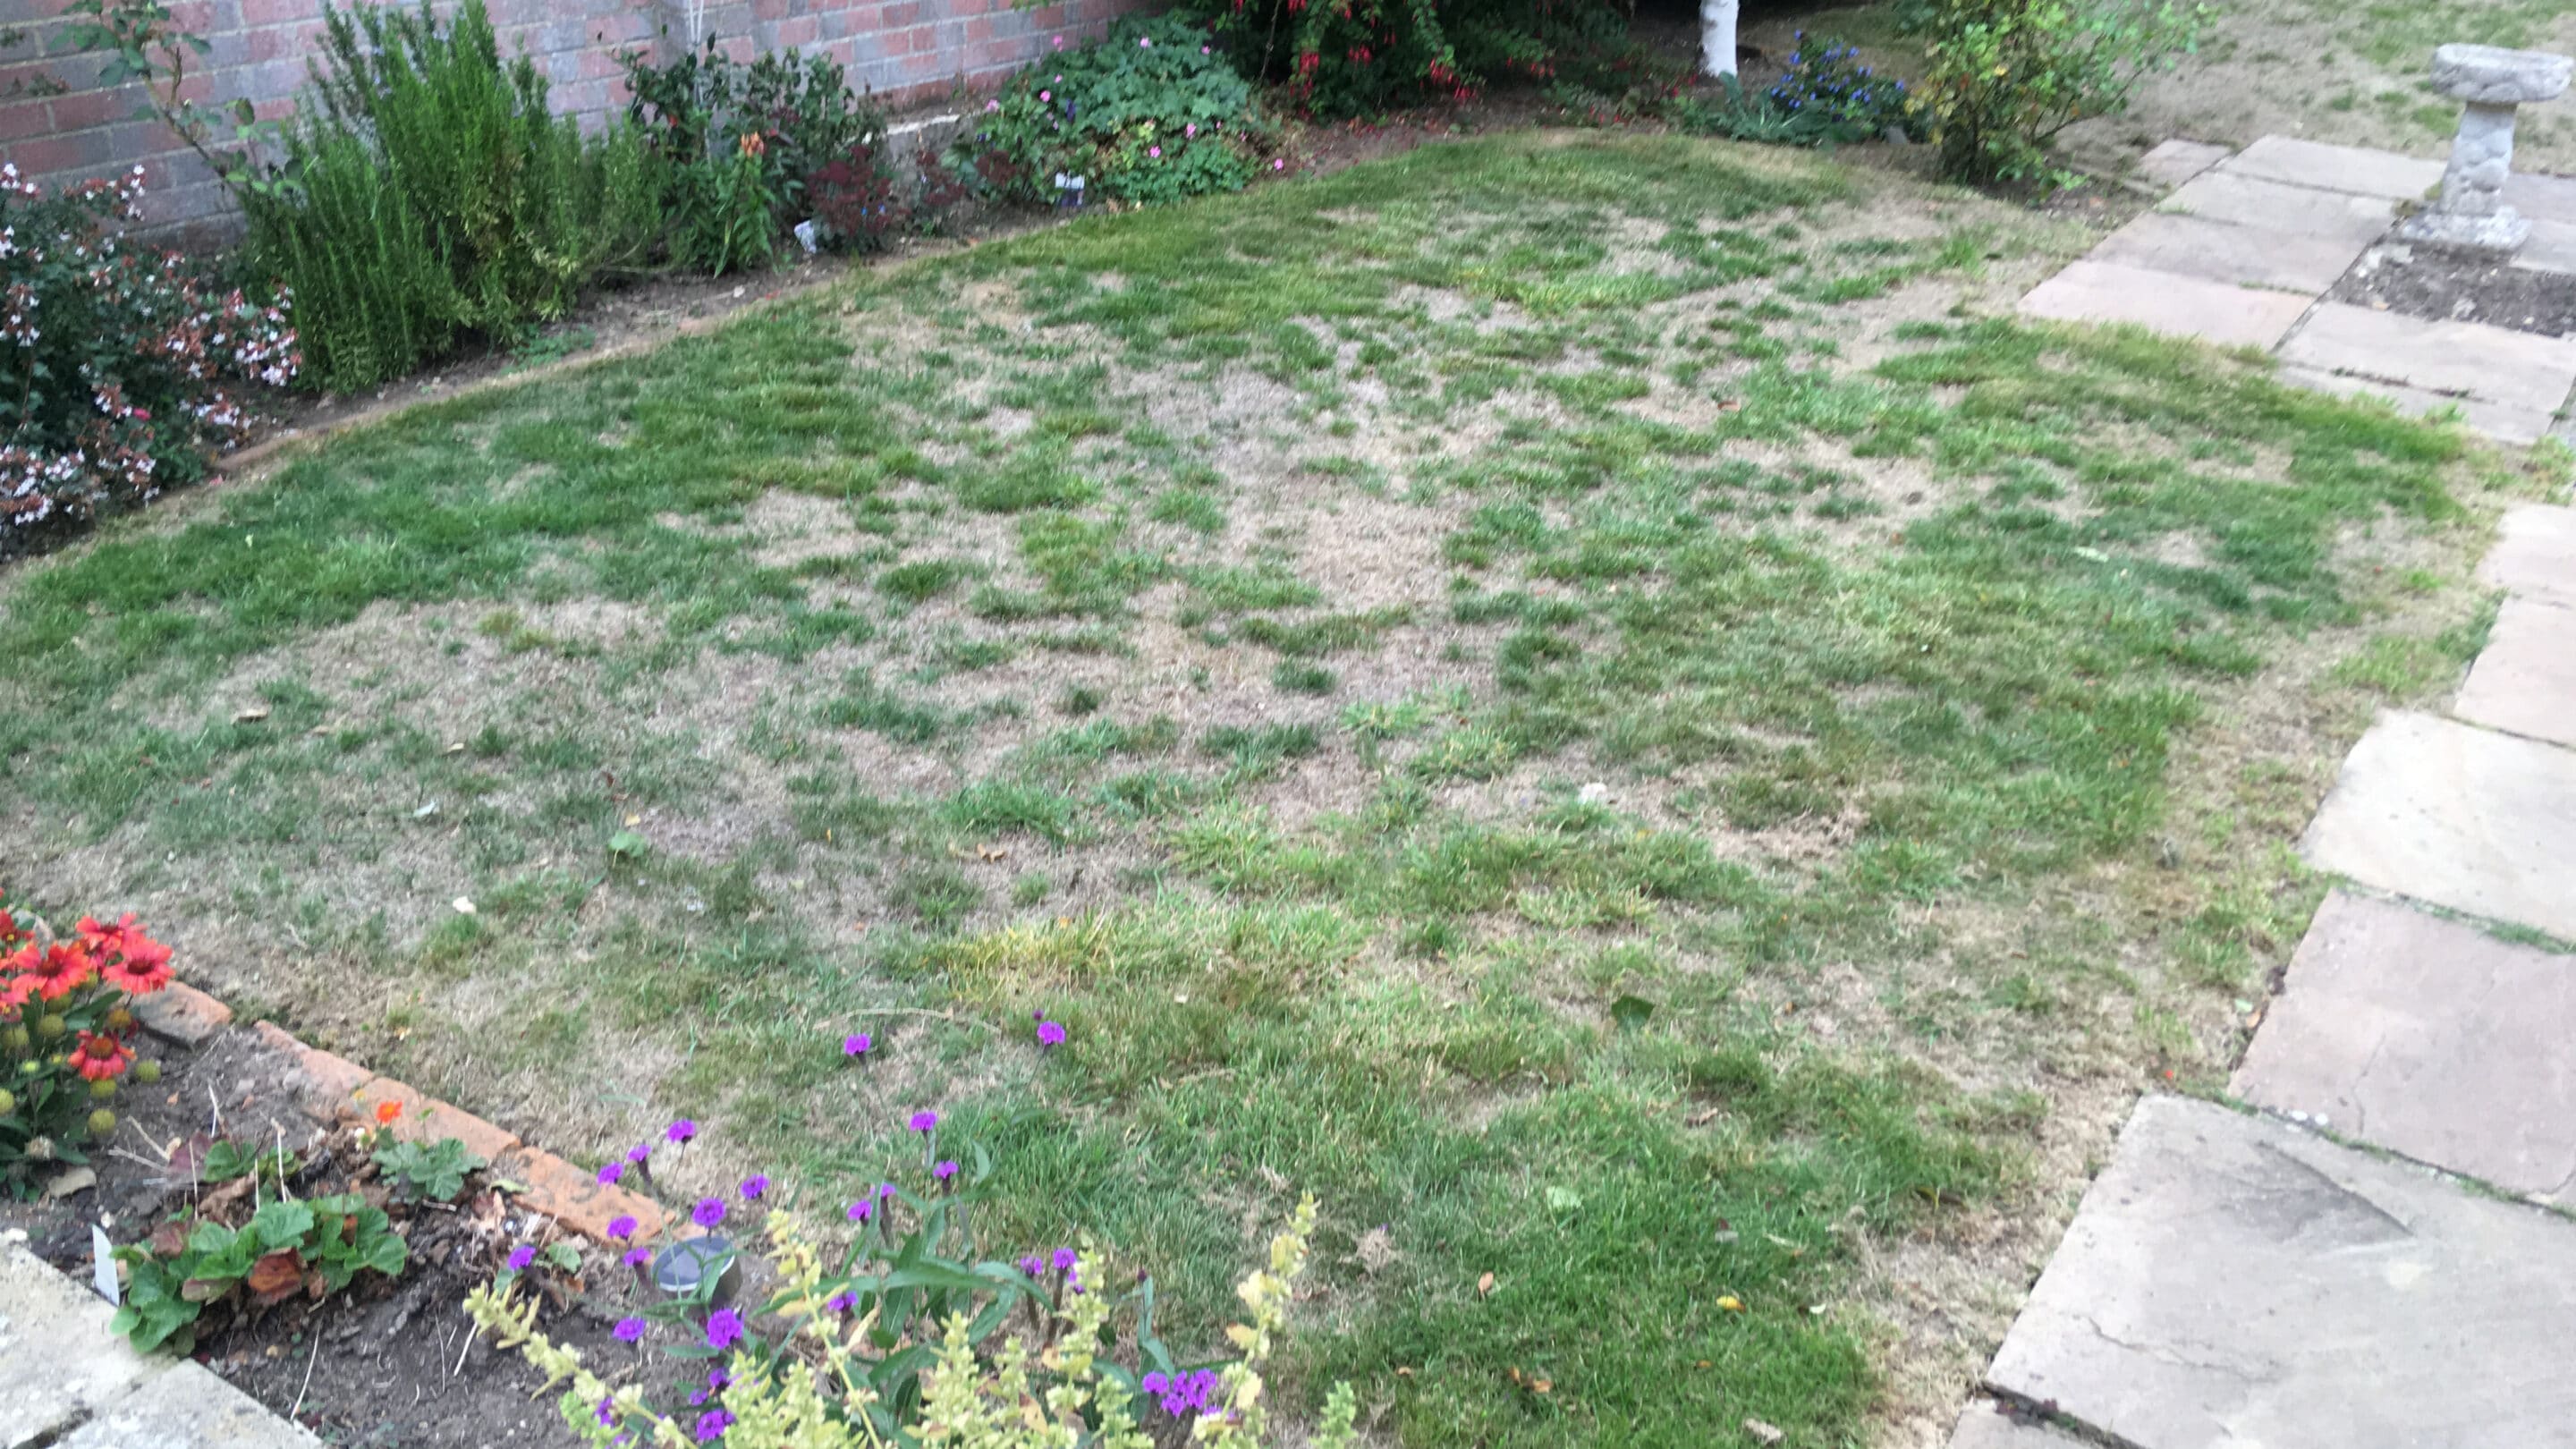 Dry patches on lawn